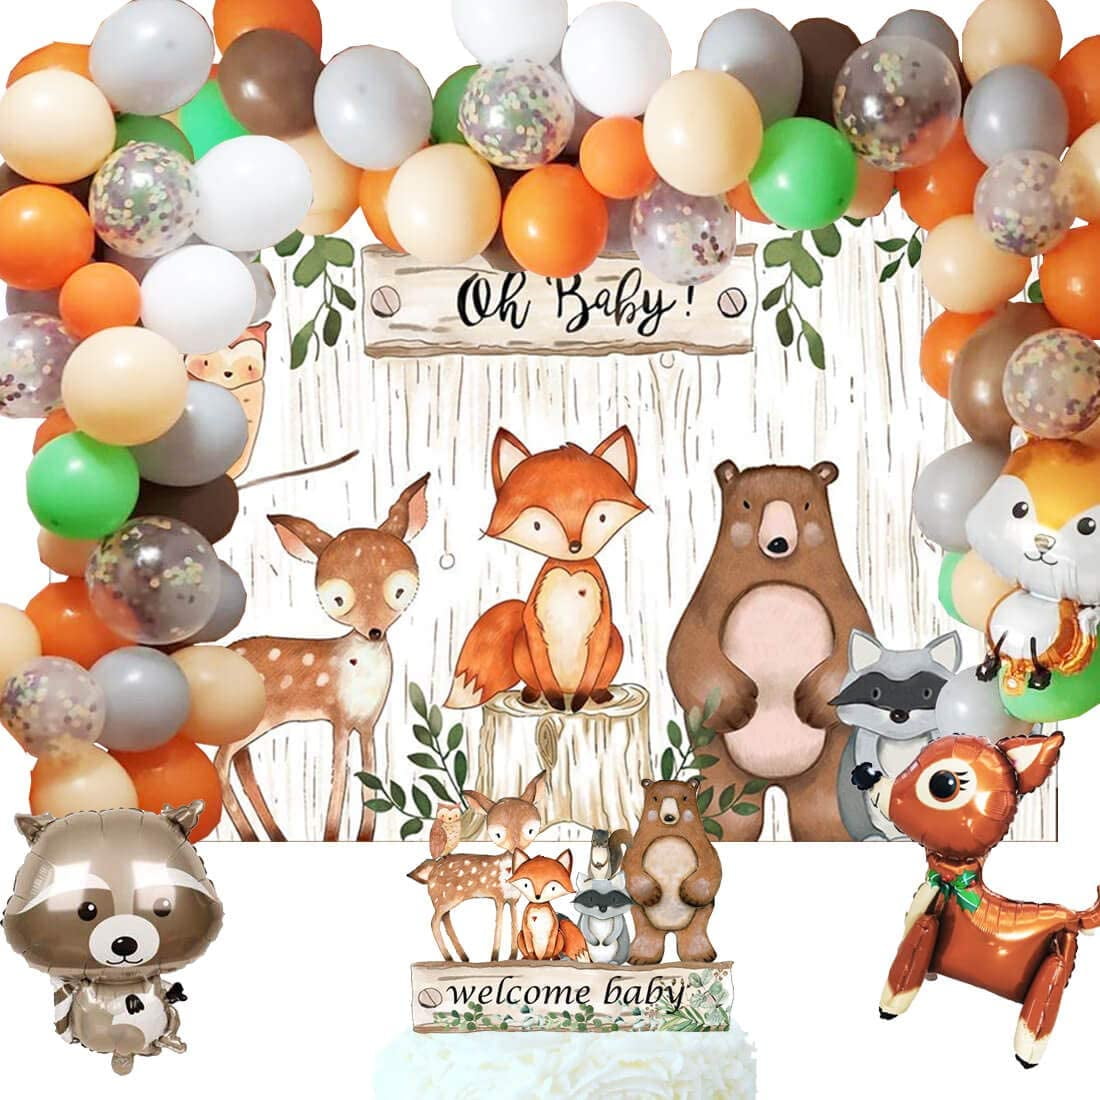 Oh Baby Girl Fox Banner for Woodland Baby Shower or Gender Reveal Party Decorations 